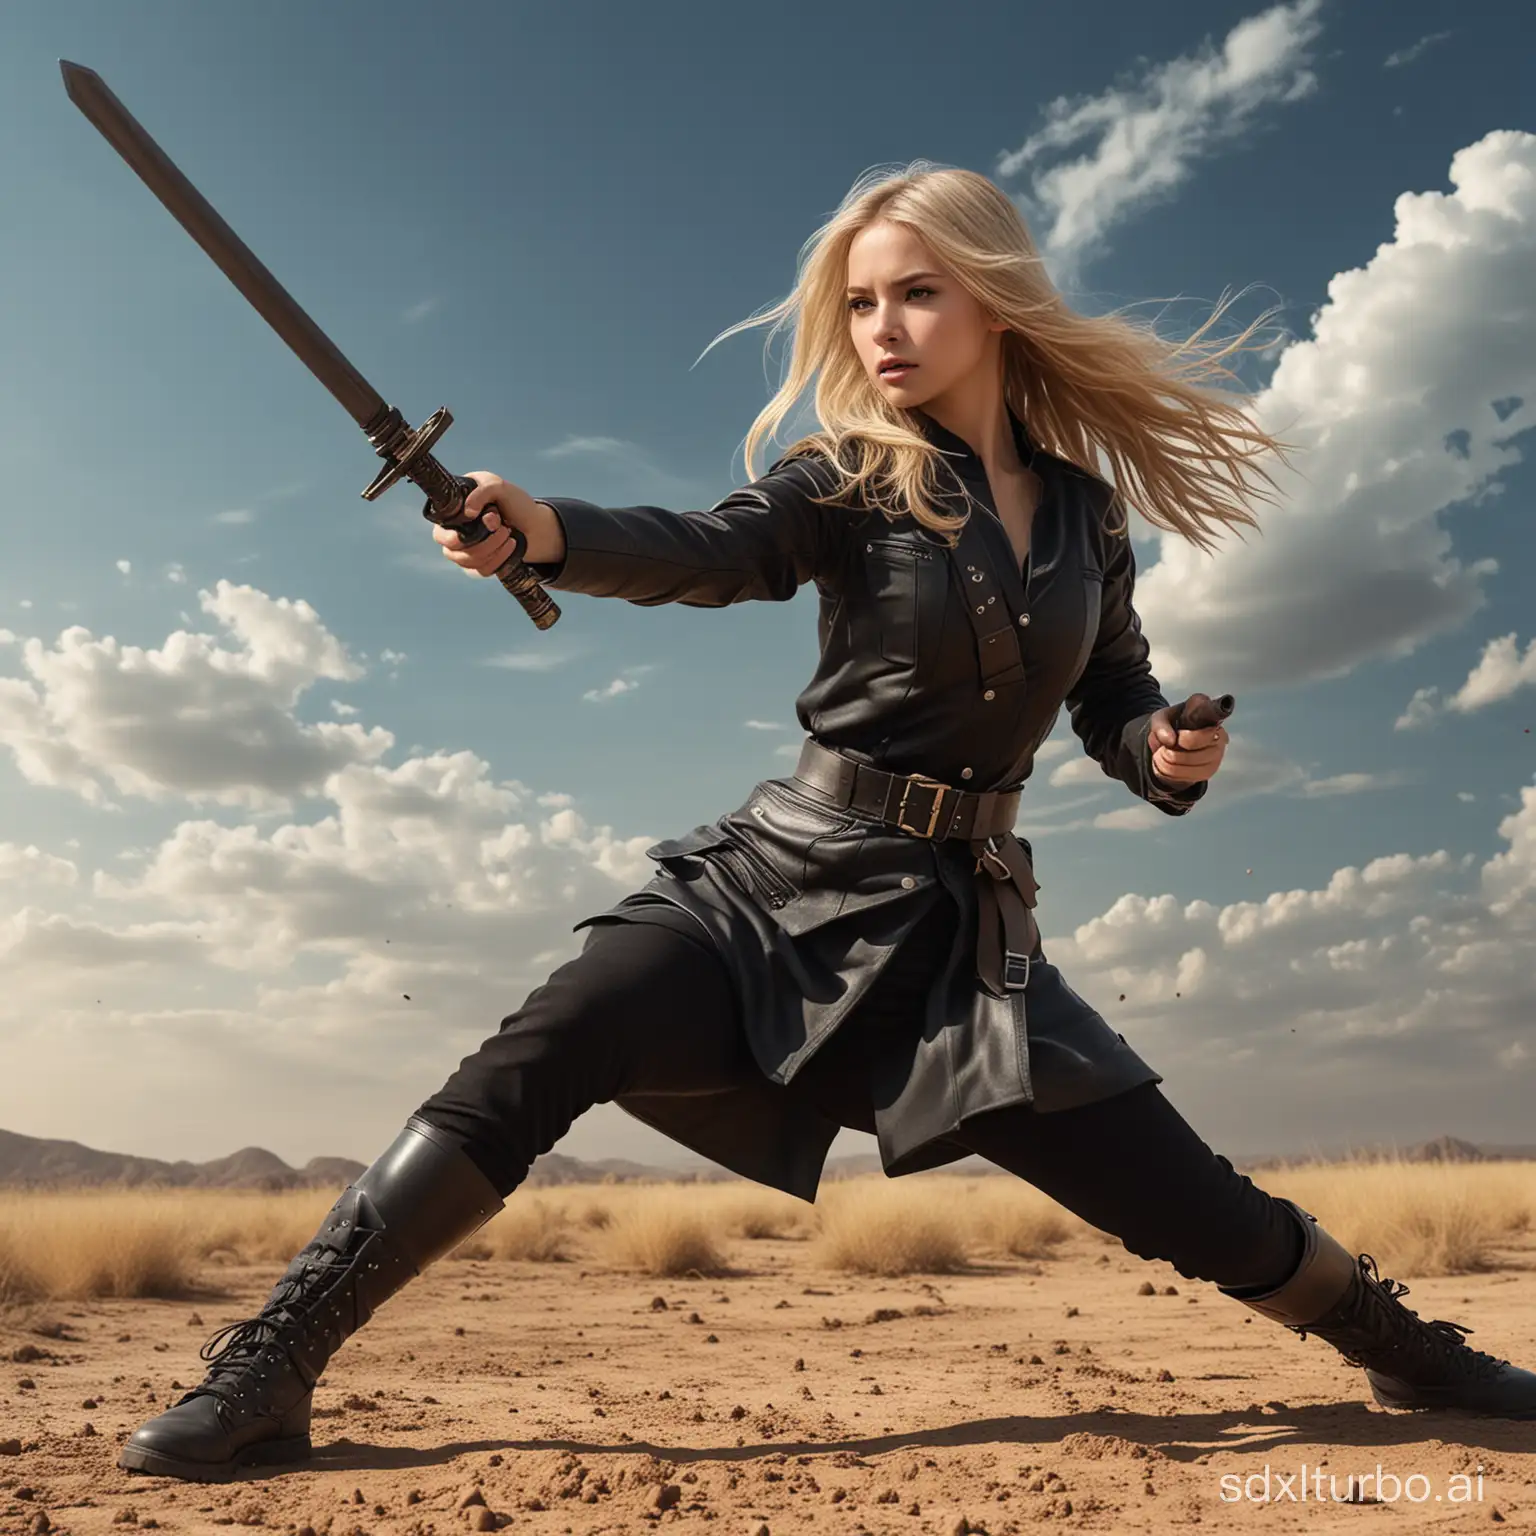 Dynamic-Warrior-Girl-Shooting-Bullet-in-Action-Movie-Style-Poster